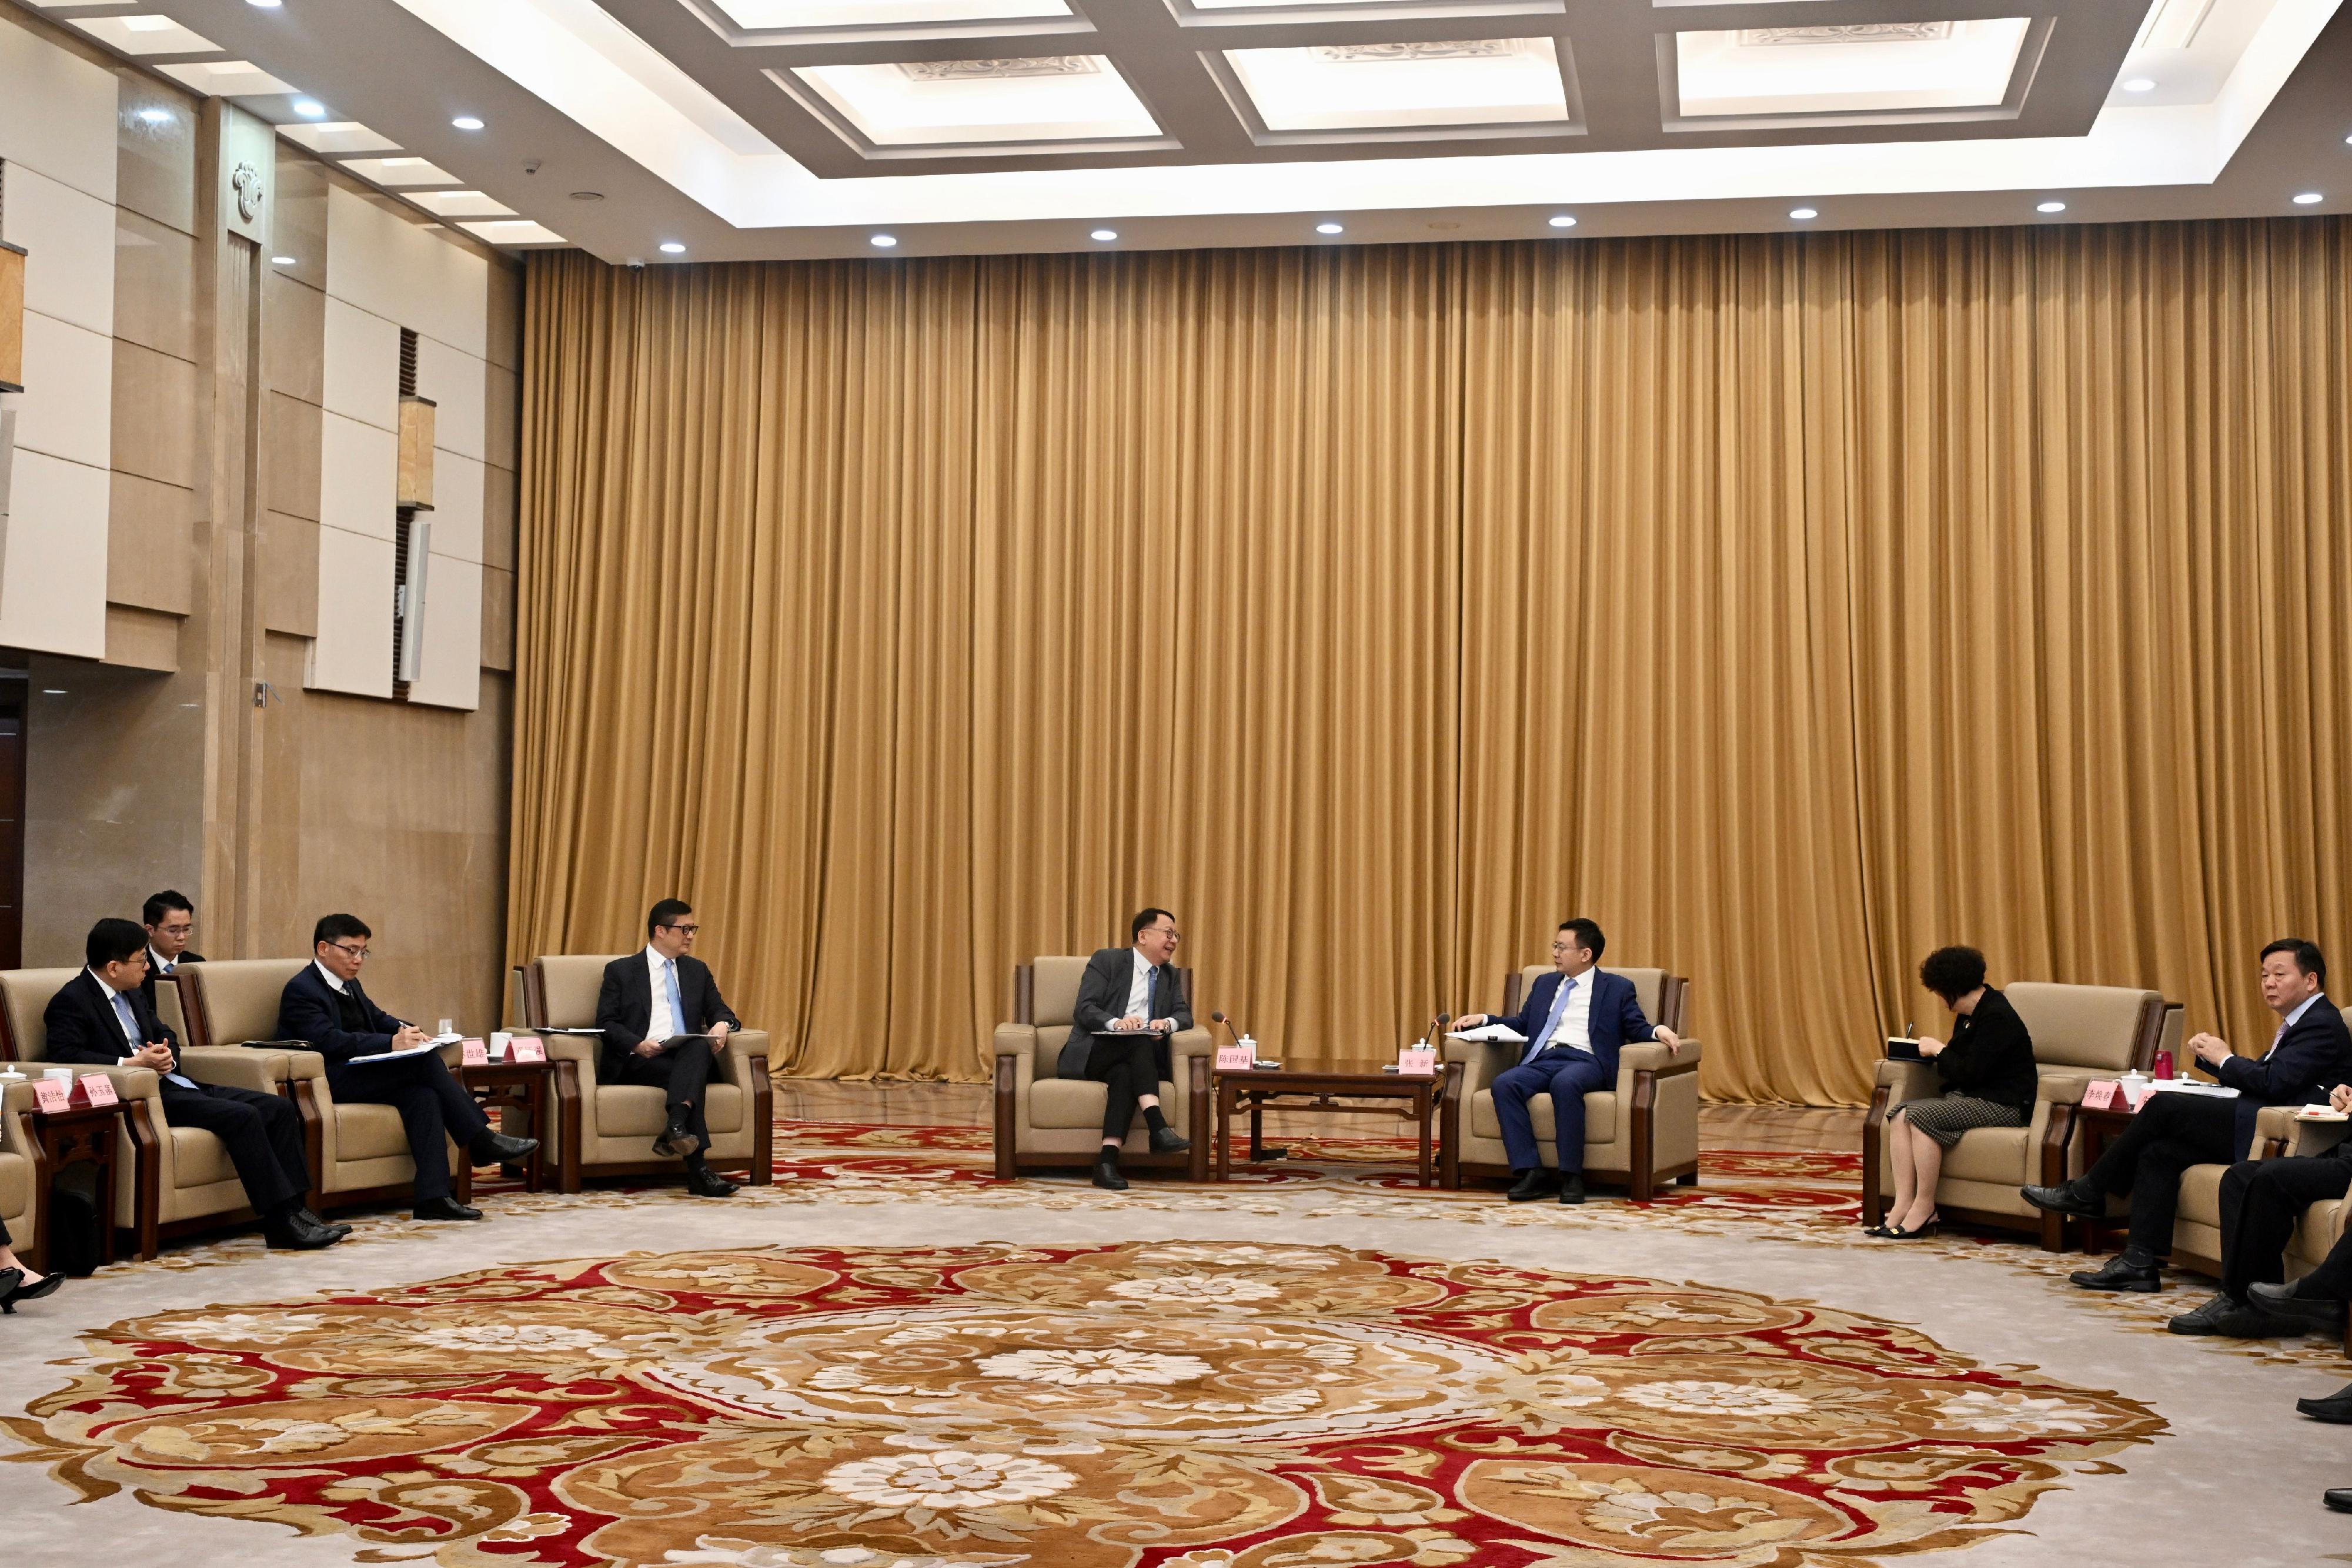 The Chief Secretary for Administration, Mr Chan Kwok-ki, arrived in Guangzhou today (January 8) to begin his visit to Mainland cities of the Guangdong-Hong Kong-Macao Greater Bay Area. Photo shows Mr Chan (fourth left) meeting Vice-Governor of the People's Government of Guangdong Province Mr Zhang Xin (fifth left). Also at the meeting are the Secretary for Security, Mr Tang Ping-keung (third left); the Secretary for Transport and Logistics, Mr Lam Sai-hung (second left); and the Secretary for Labour and Welfare, Mr Chris Sun (first left).